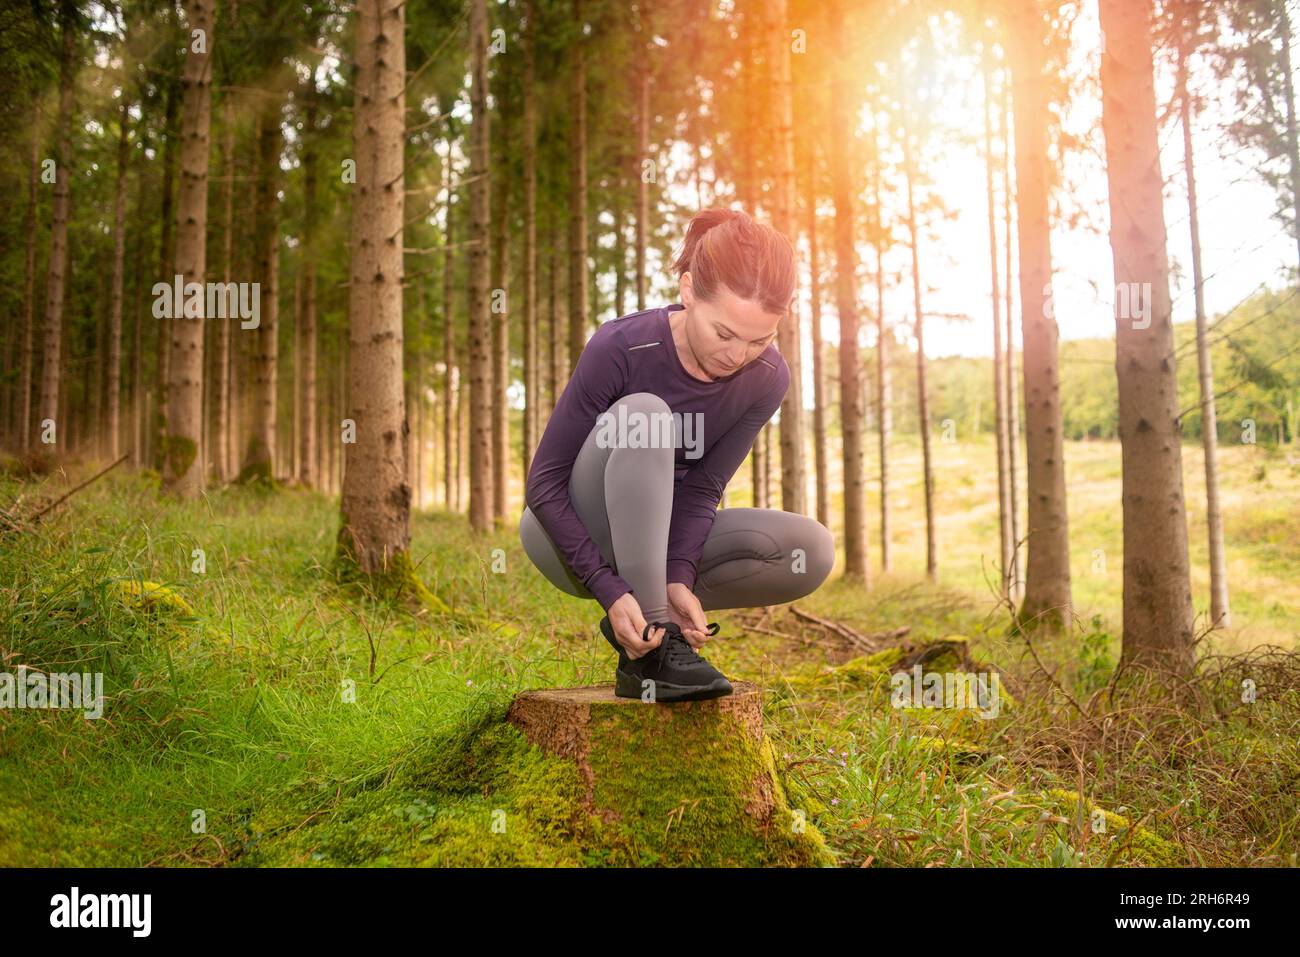 Sporty woman tying up her shoelaces in preperation for running in the forest. Outdoor fitness concept. Stock Photo